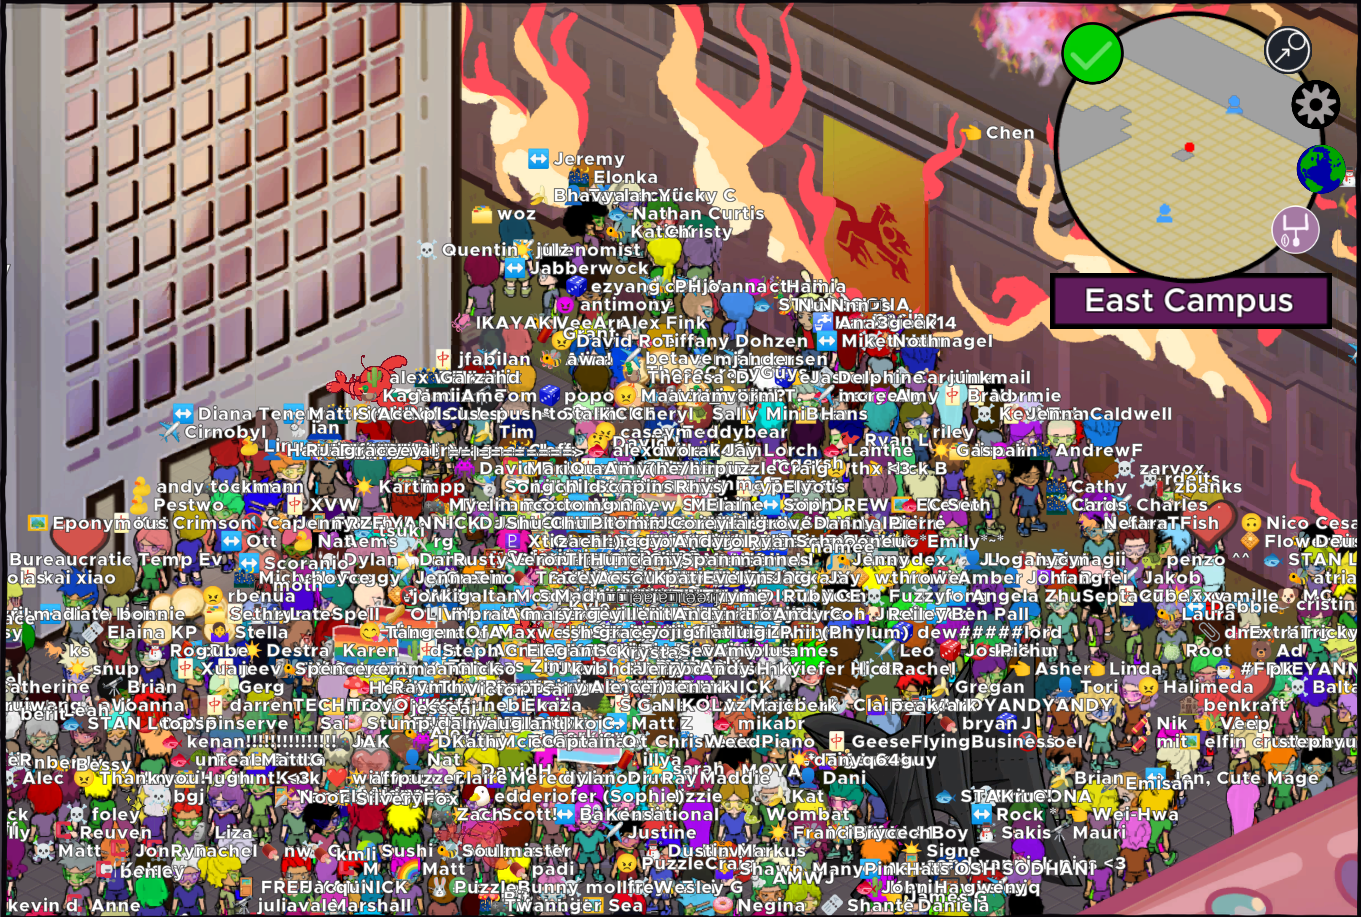 Screenshot of hundreds of participants' avatars in the Green Building